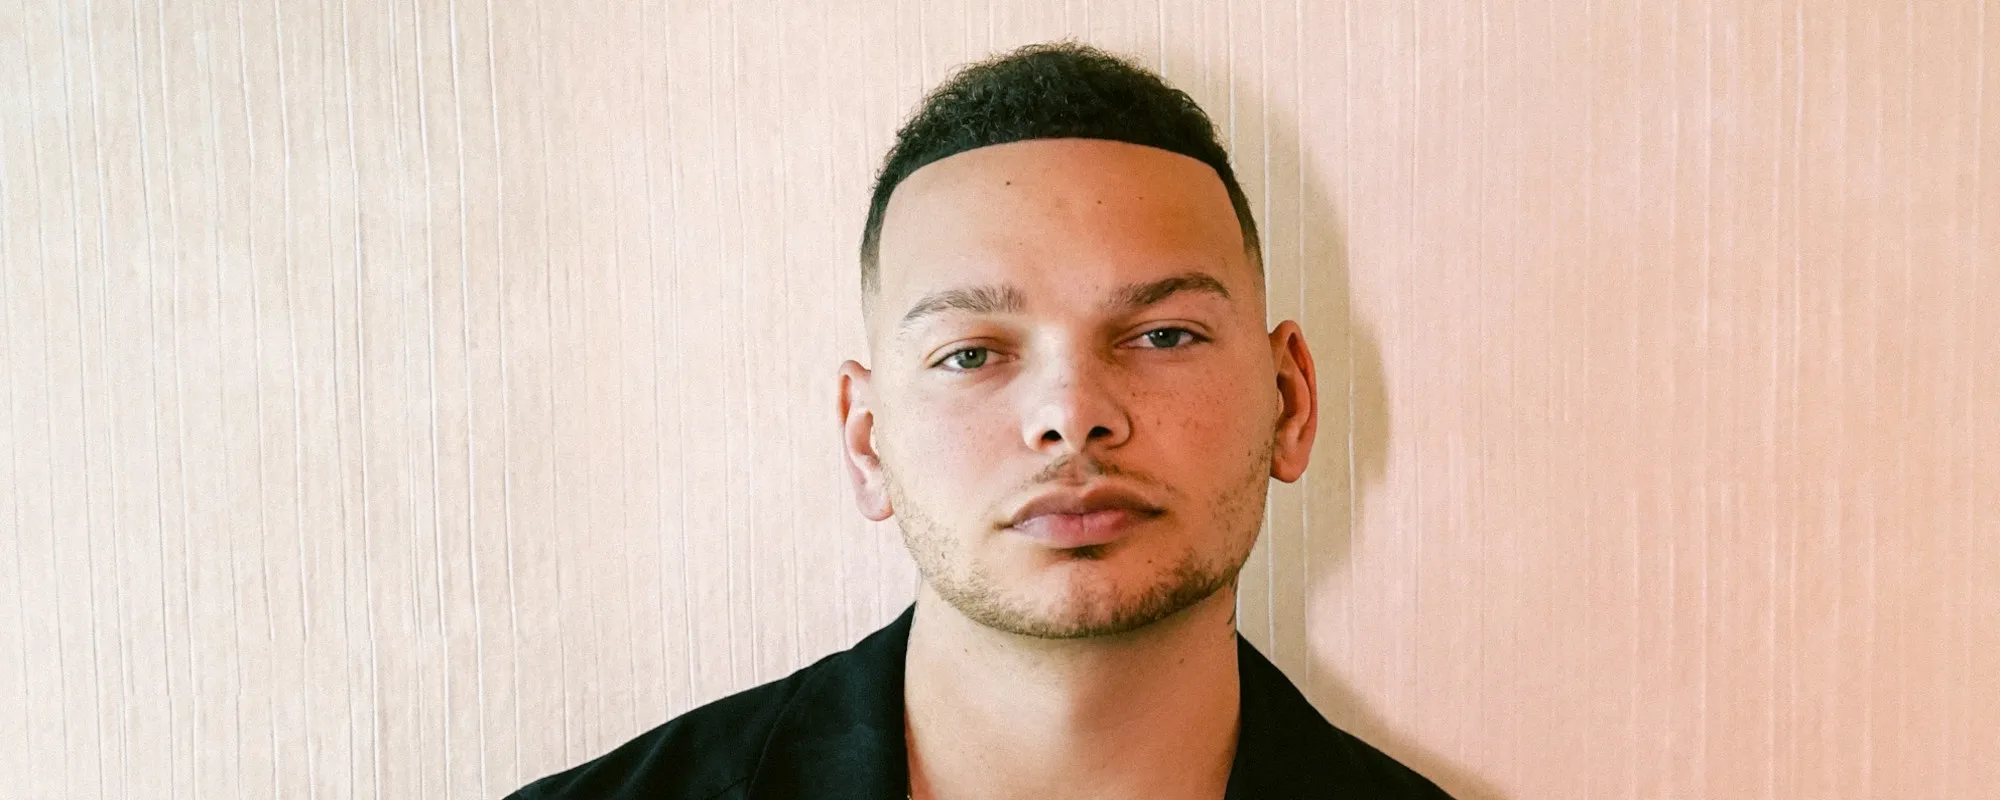 Kane Brown Puts Cowboy Boots on Phil Collins for “I Can Feel It”